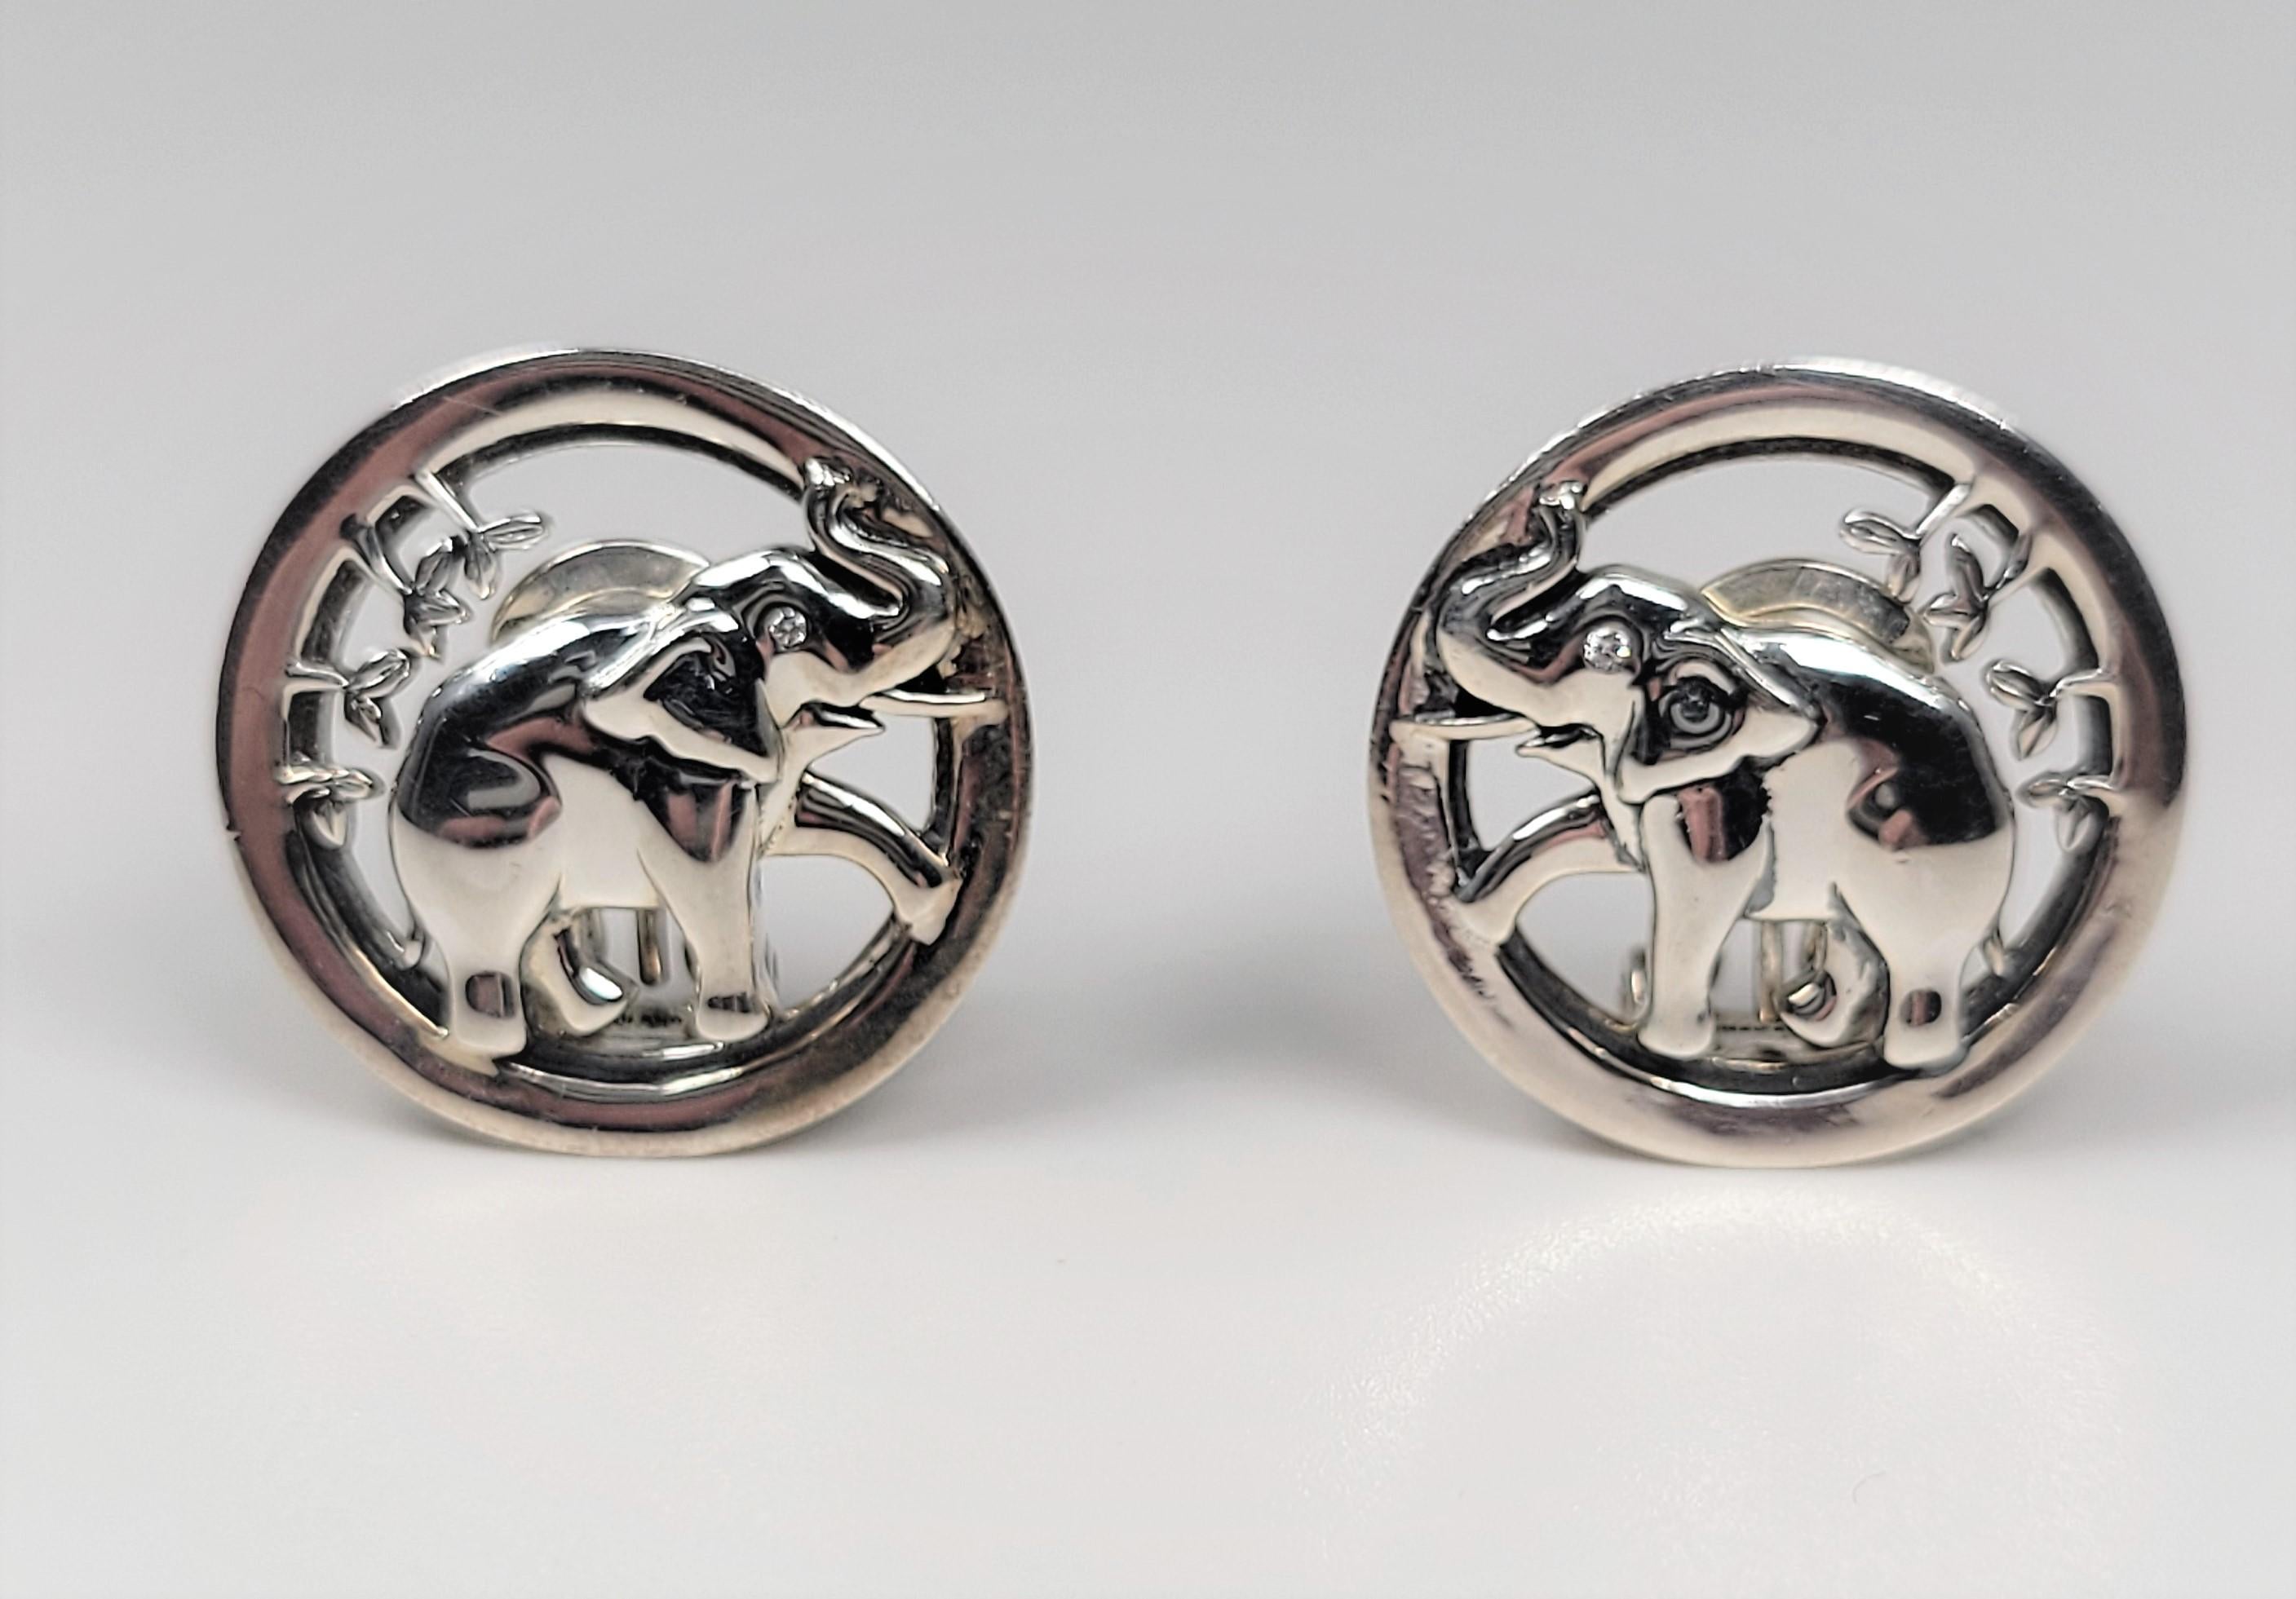 Kieselstein-Cord Sterling Silver elephant earrings with diamond eyes.  These versatile earrings can be worn with pierced ears or as clip ons!